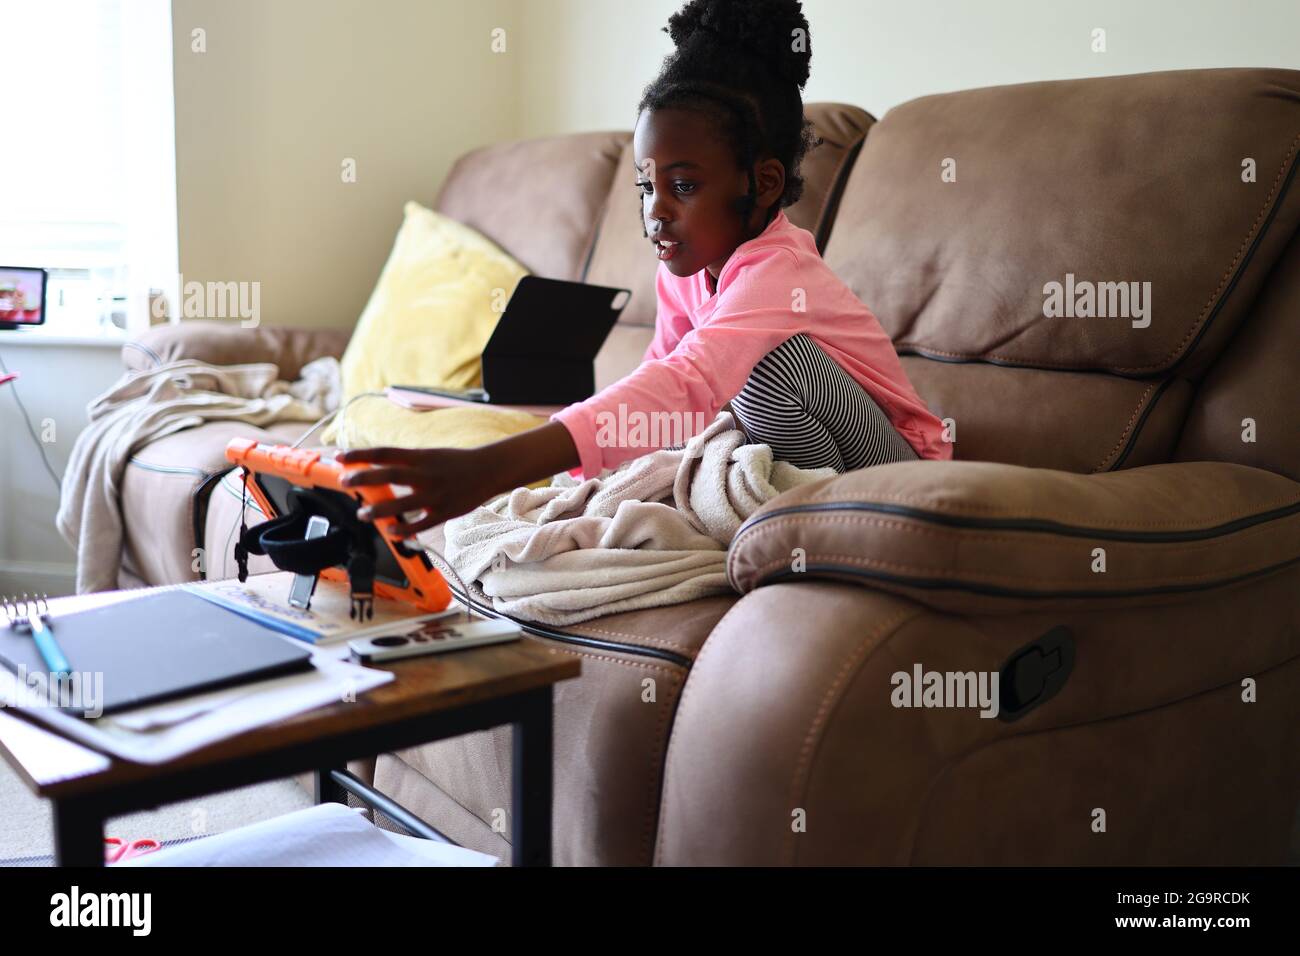 A black girl attending a remote Zoom or Teams class during the COVID19 pandemic Stock Photo